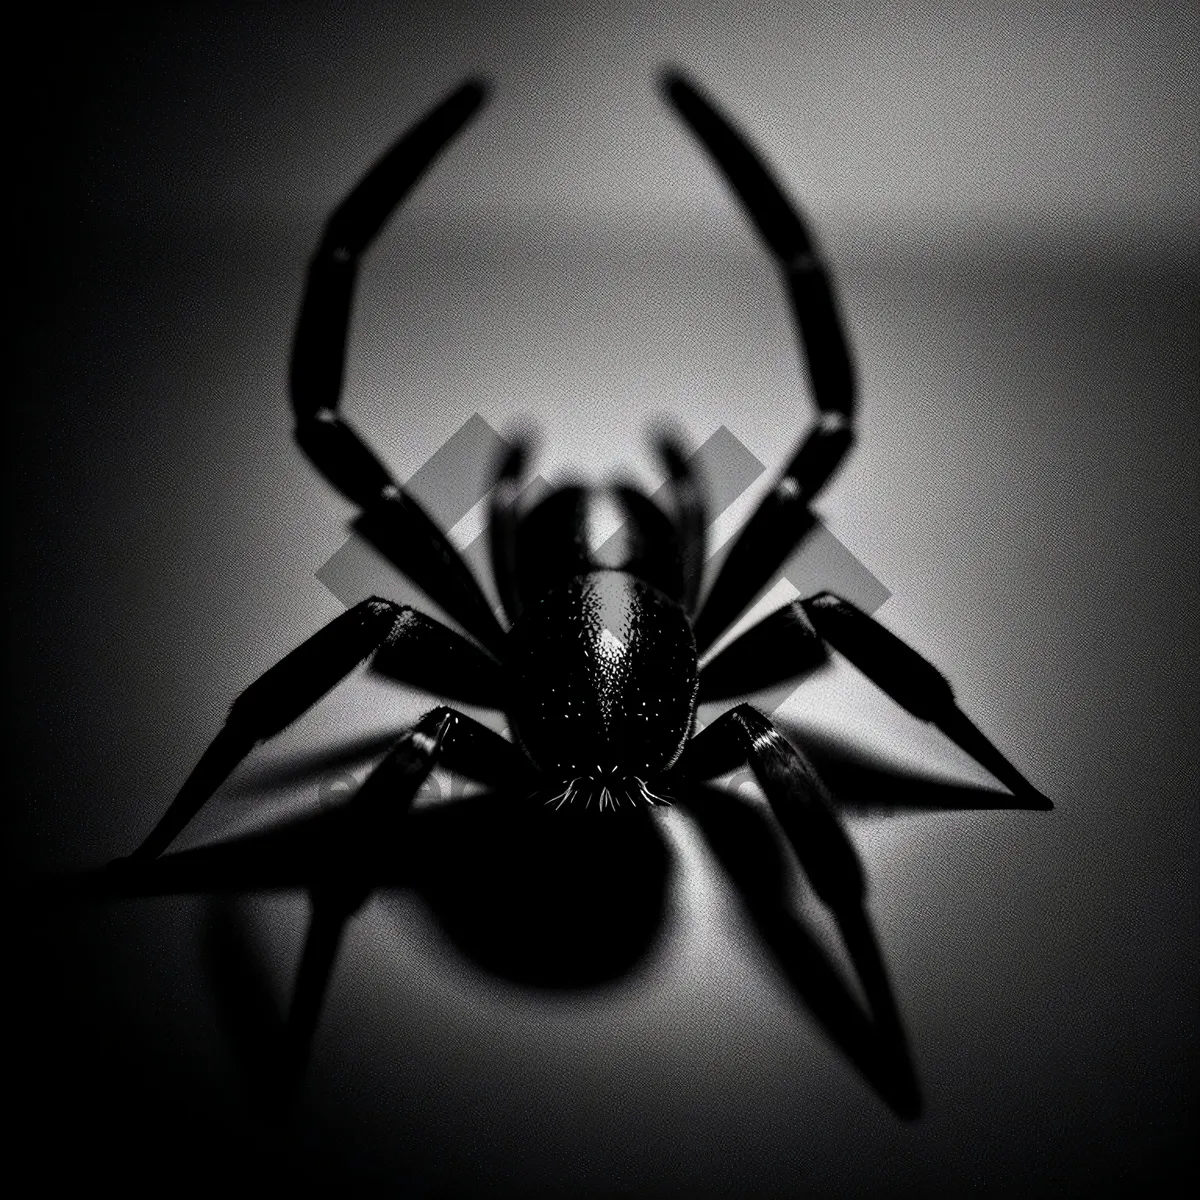 Picture of Close-Up View of Black Widow Spider, a Dangerous Arachnid